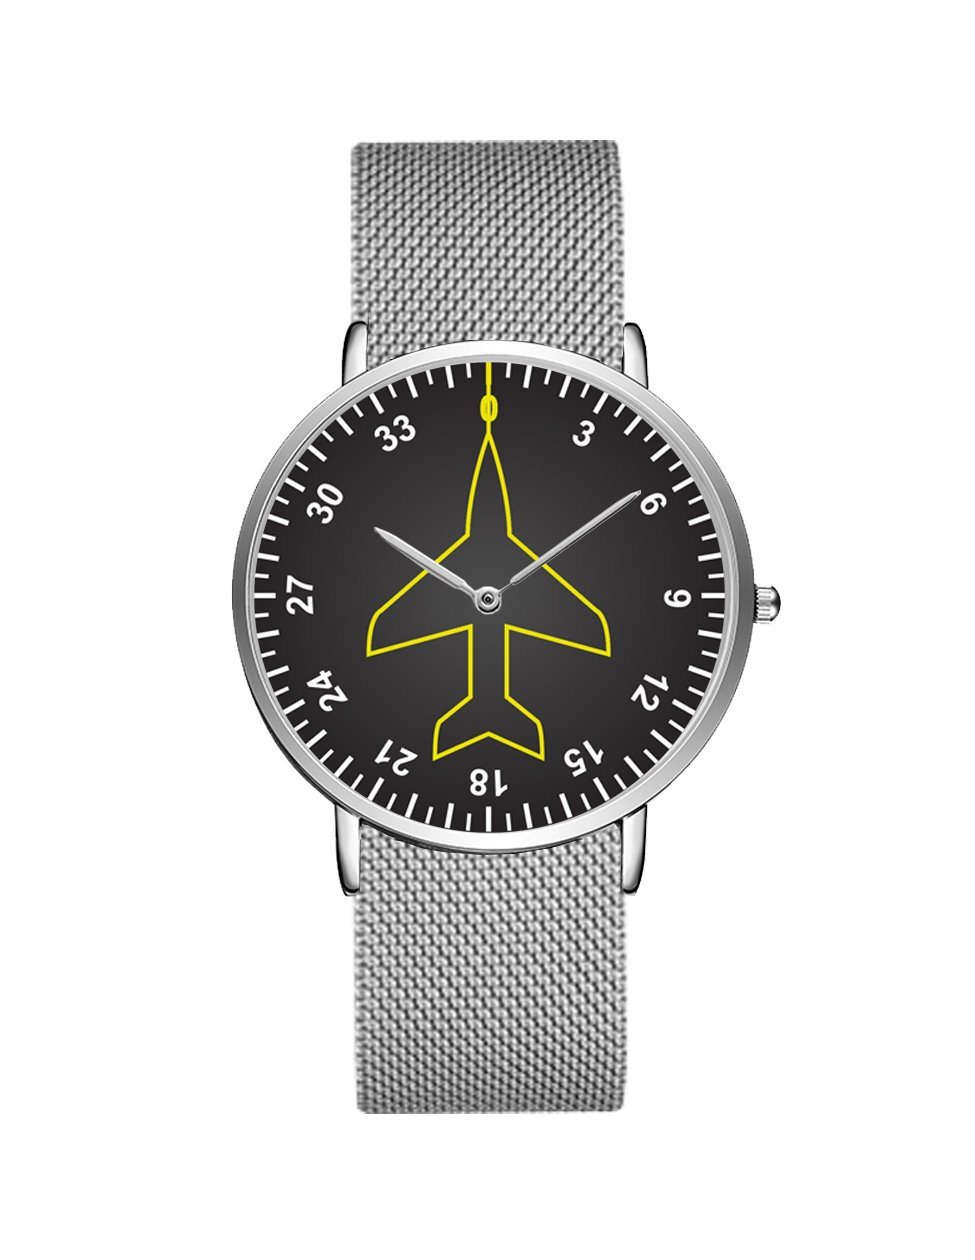 Airplane Instrument Series (Heading) Stainless Steel Strap Watches Pilot Eyes Store Silver & Silver Stainless Steel Strap 